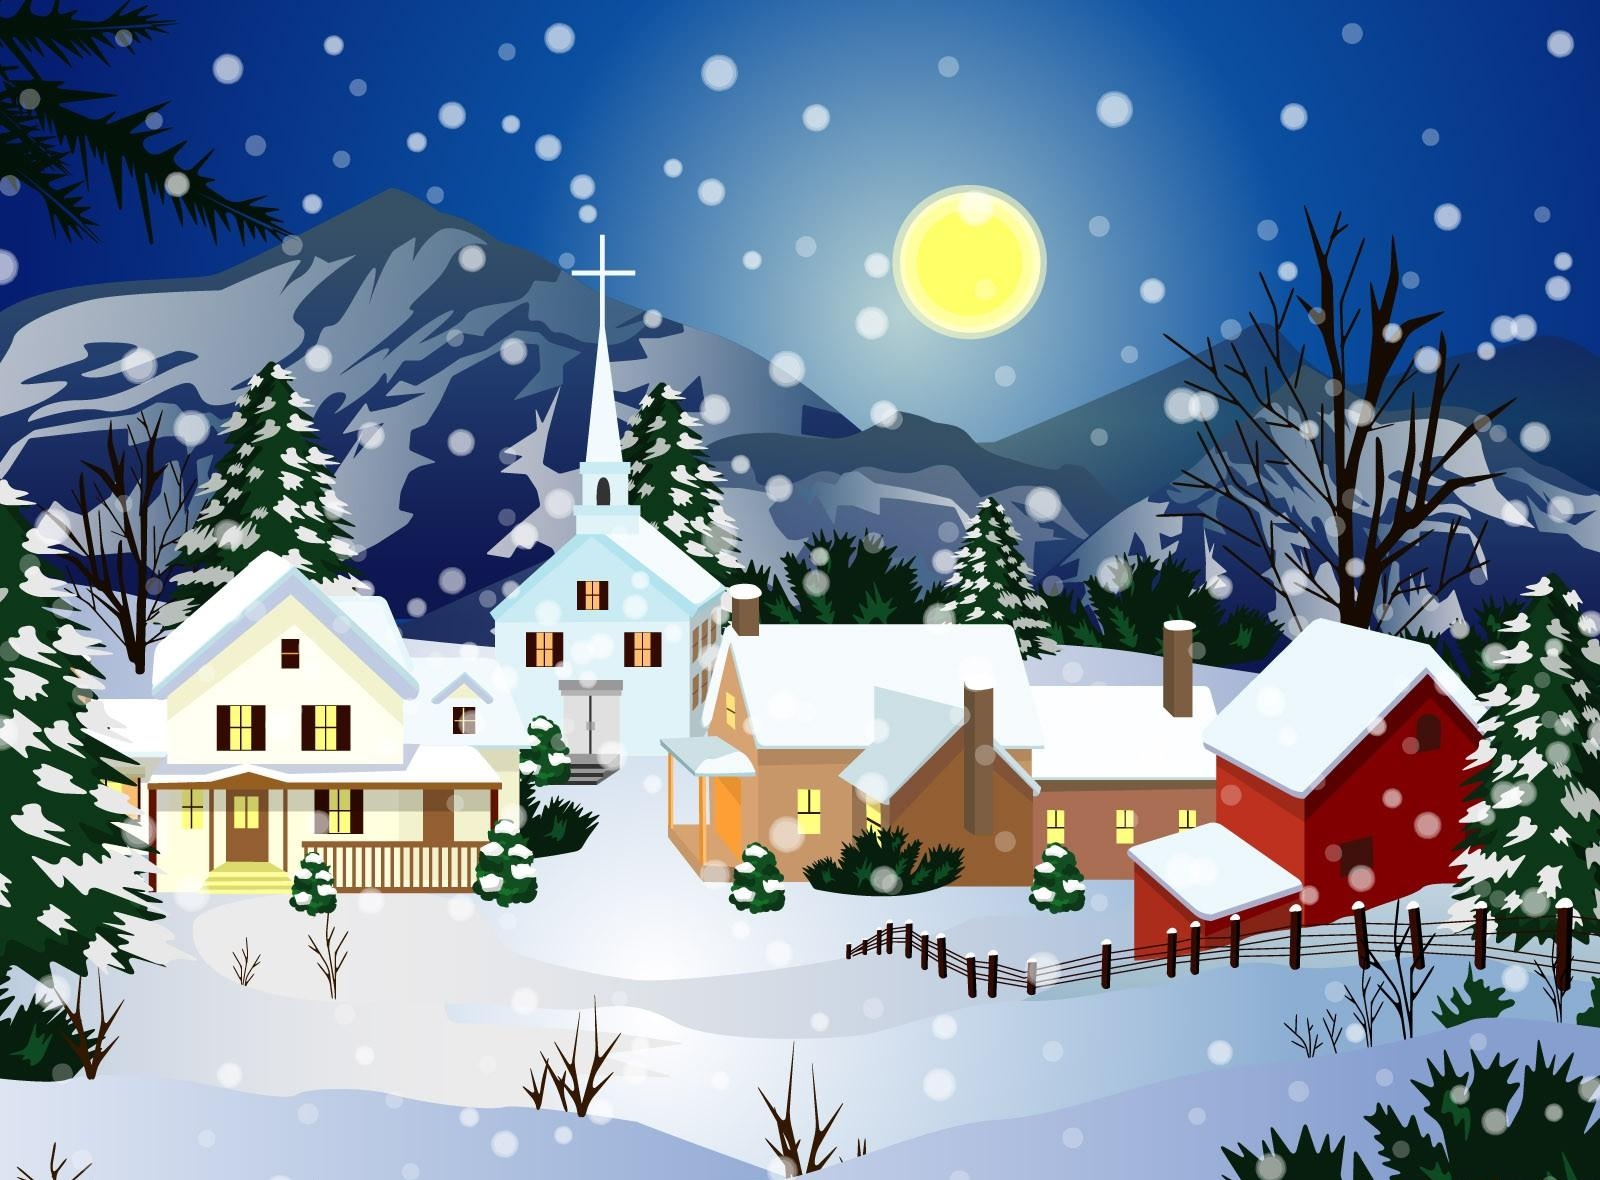 houses, holidays, winter, night, snow, full moon, church images